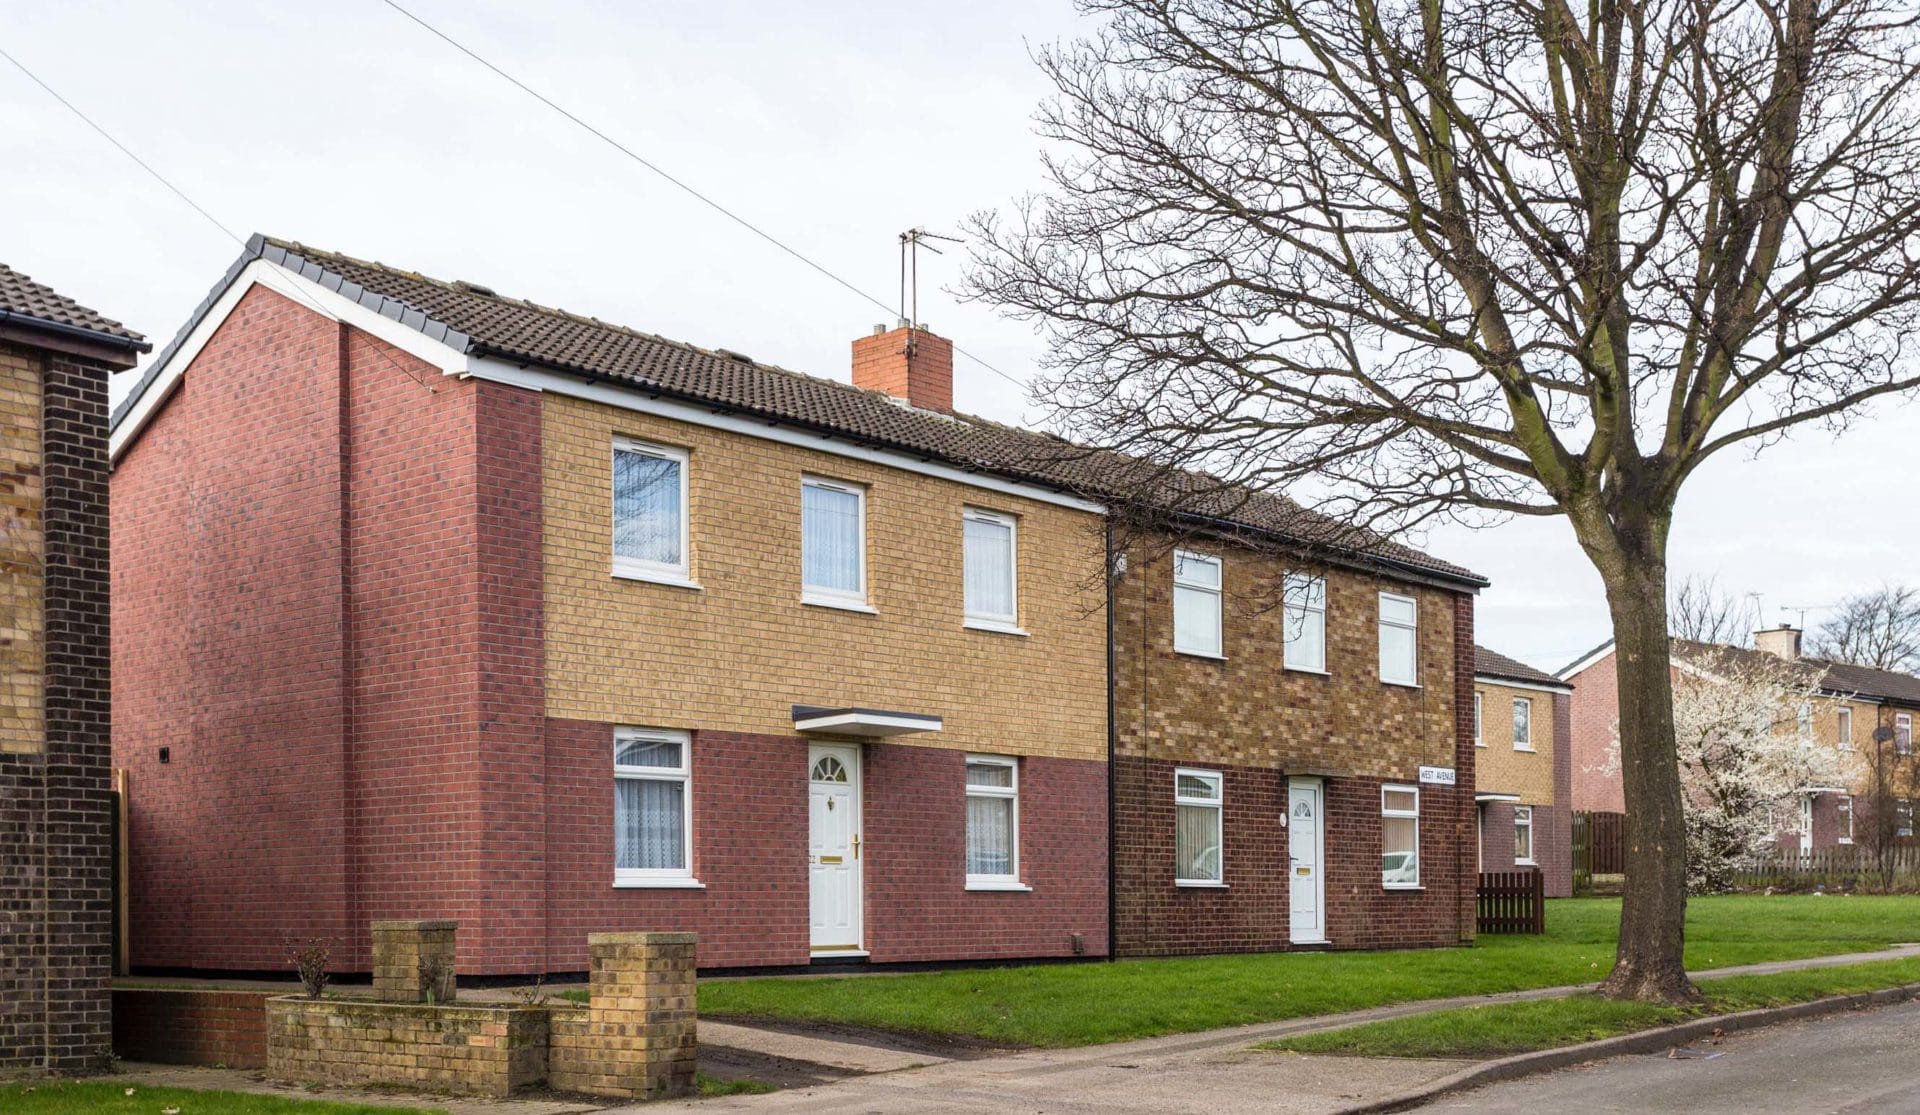 Weber’s external wall insulation improves energy efficiency for Rotherham